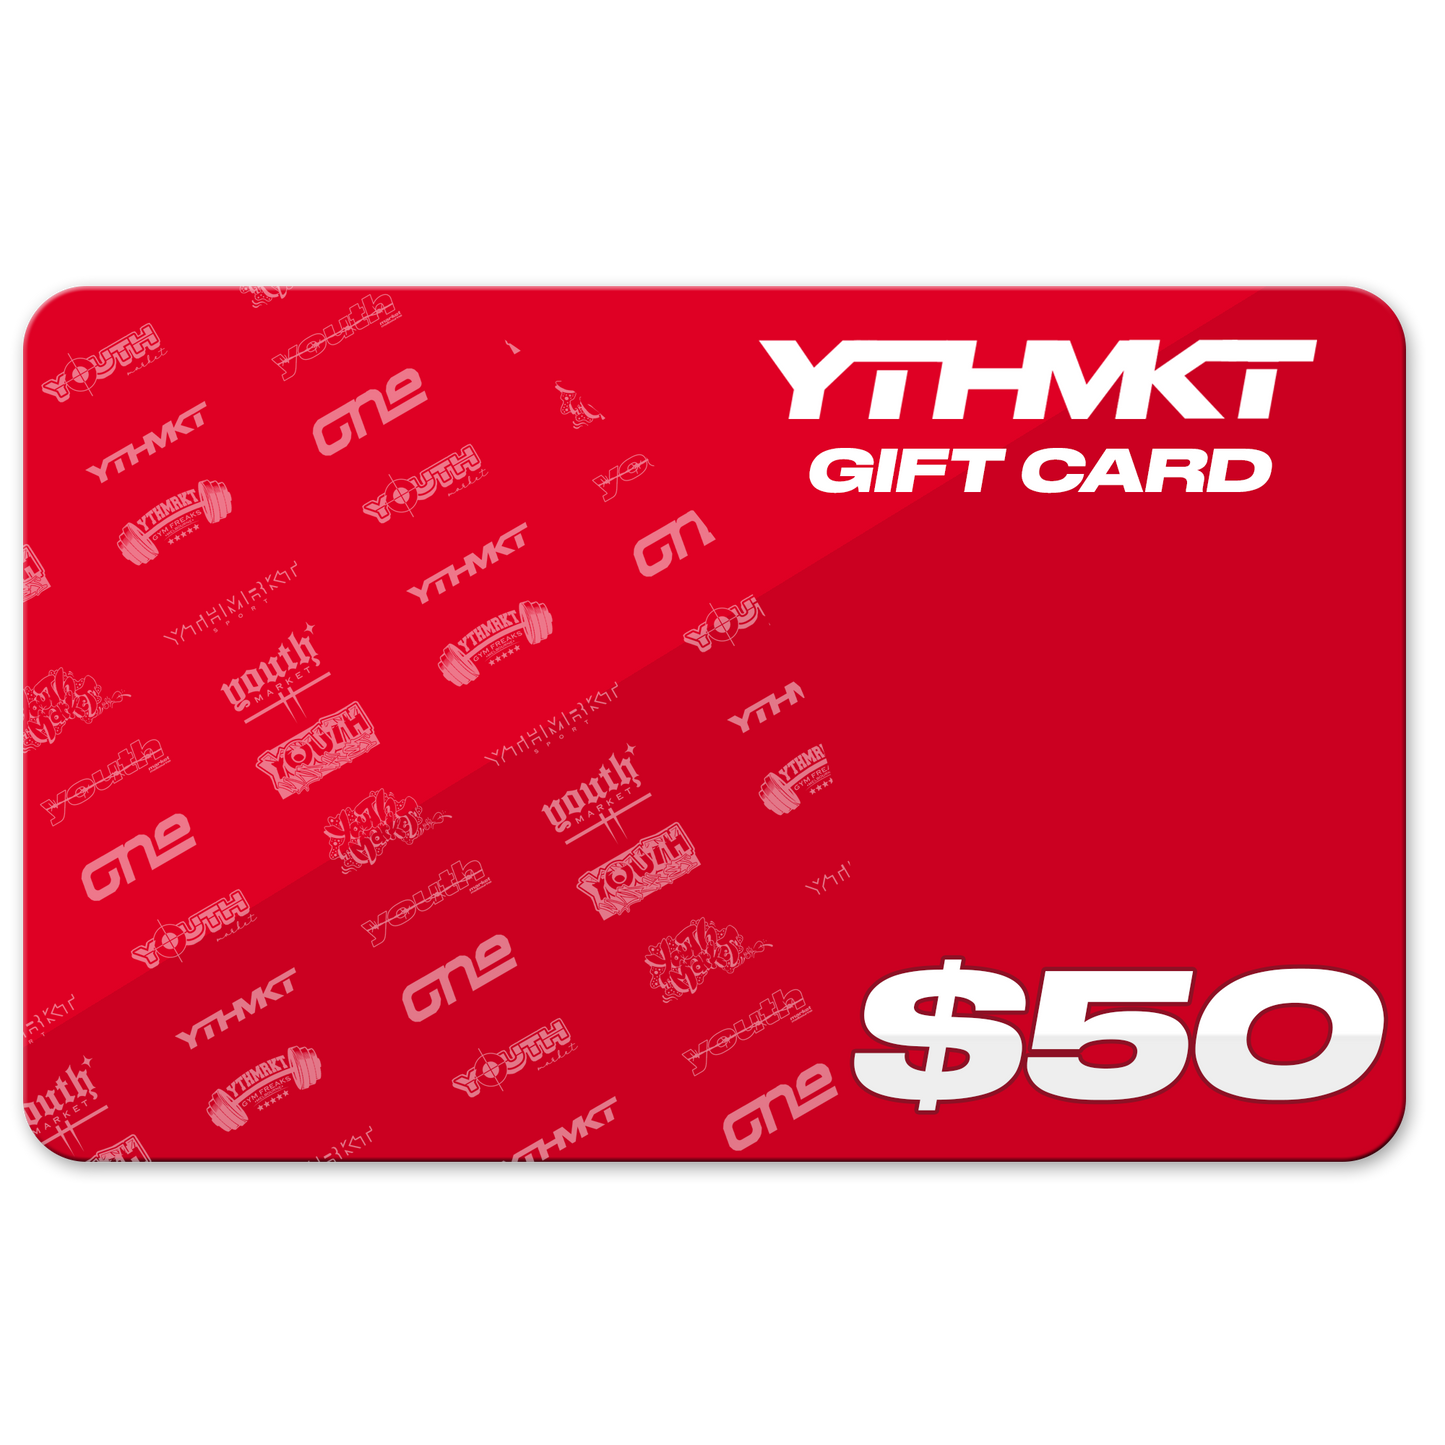 YOUTH MARKET GIFT CARD